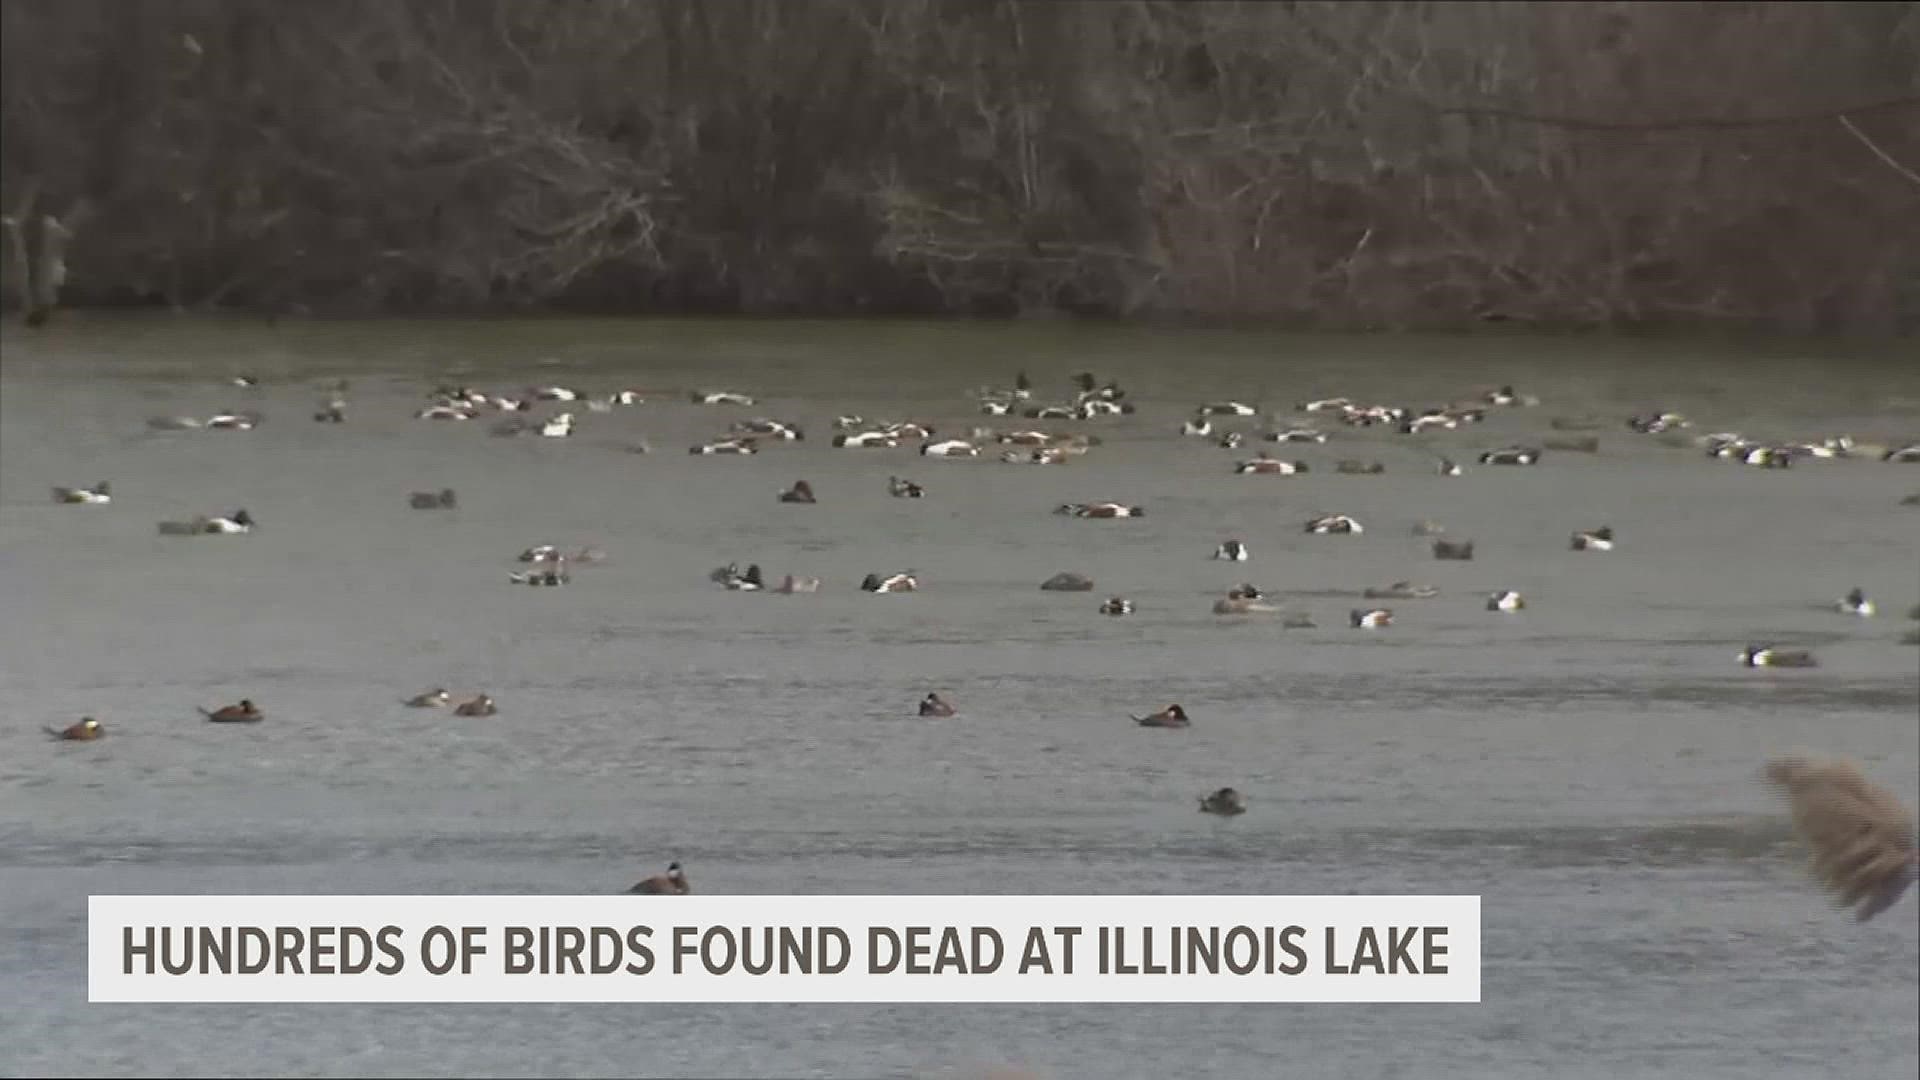 More than 200 birds have died in the past week at Baker Lake in Barrington likely from the Avian Flu, according to the Forest Preserves of Cook County.